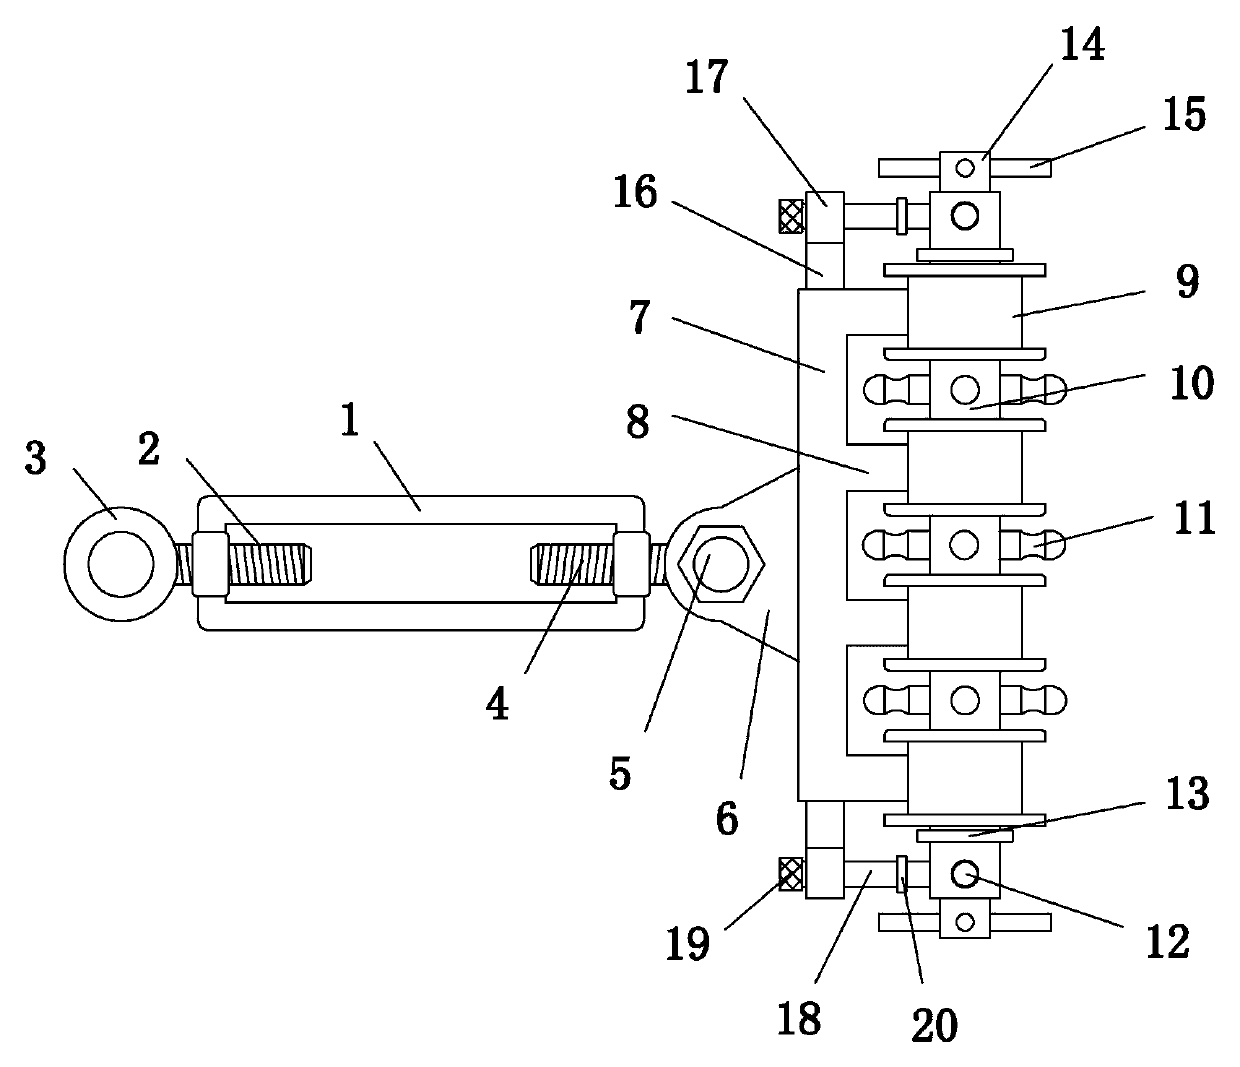 Strain clamp device for electric power engineering